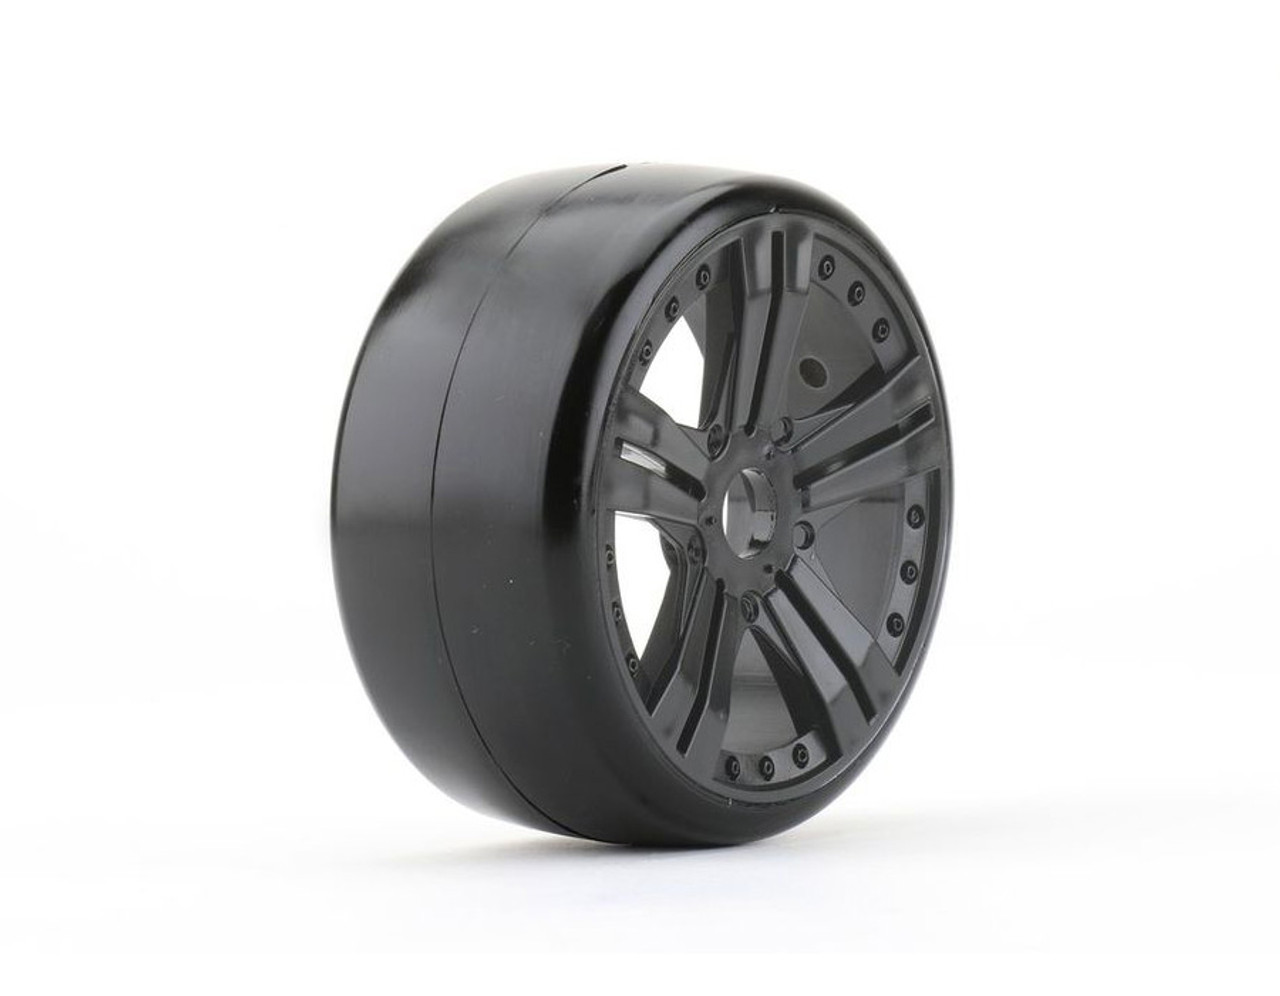 Jetko 1/8 GT Buster Tires Mounted on Black Claw Rims, Super Soft, Belted (2)